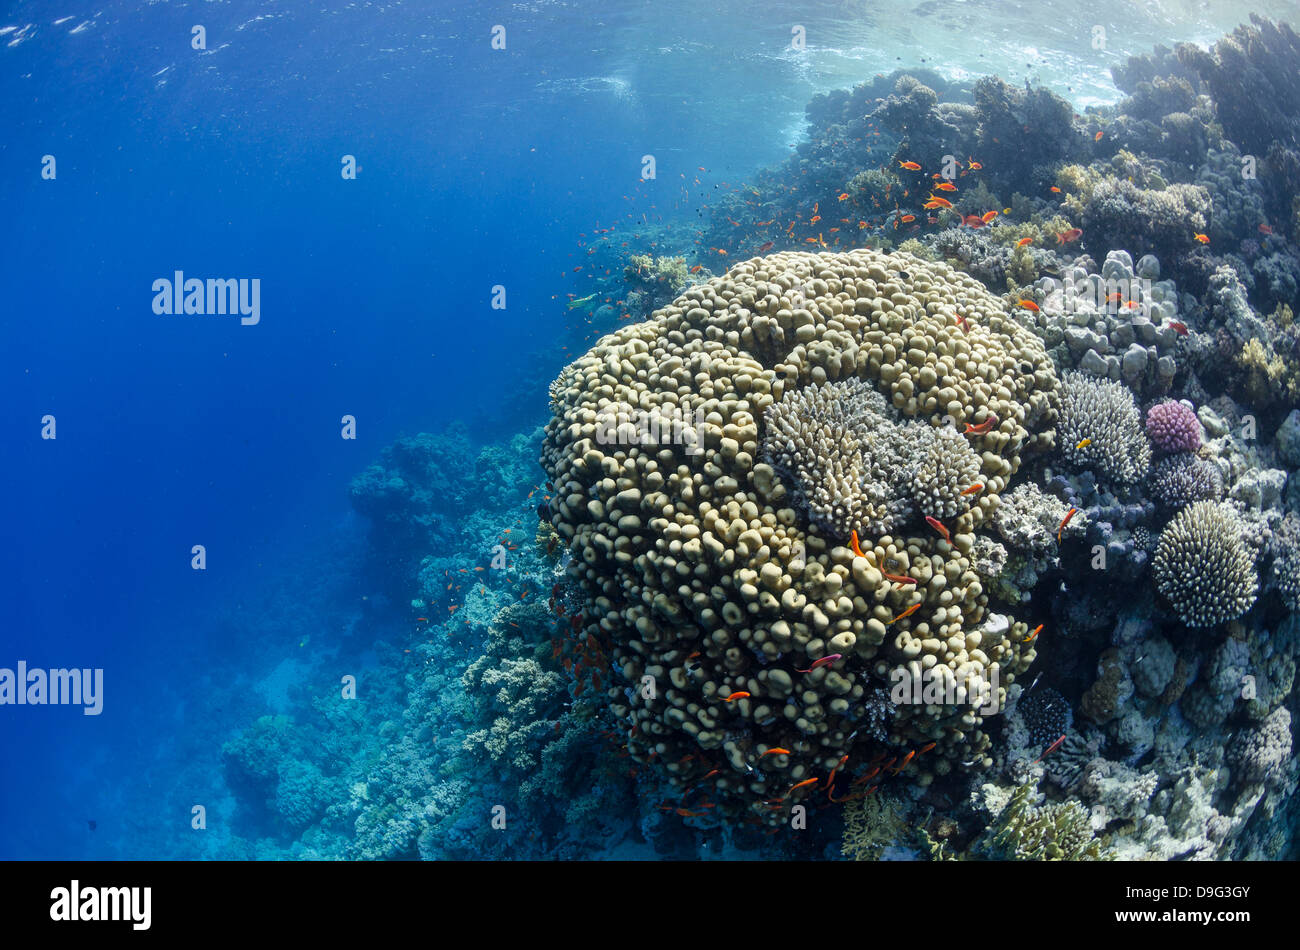 Tropical coral reef scene, Ras Mohammed National Park, off Sharm el-Sheikh, Sinai, Red Sea, Egypt, Africa Stock Photo